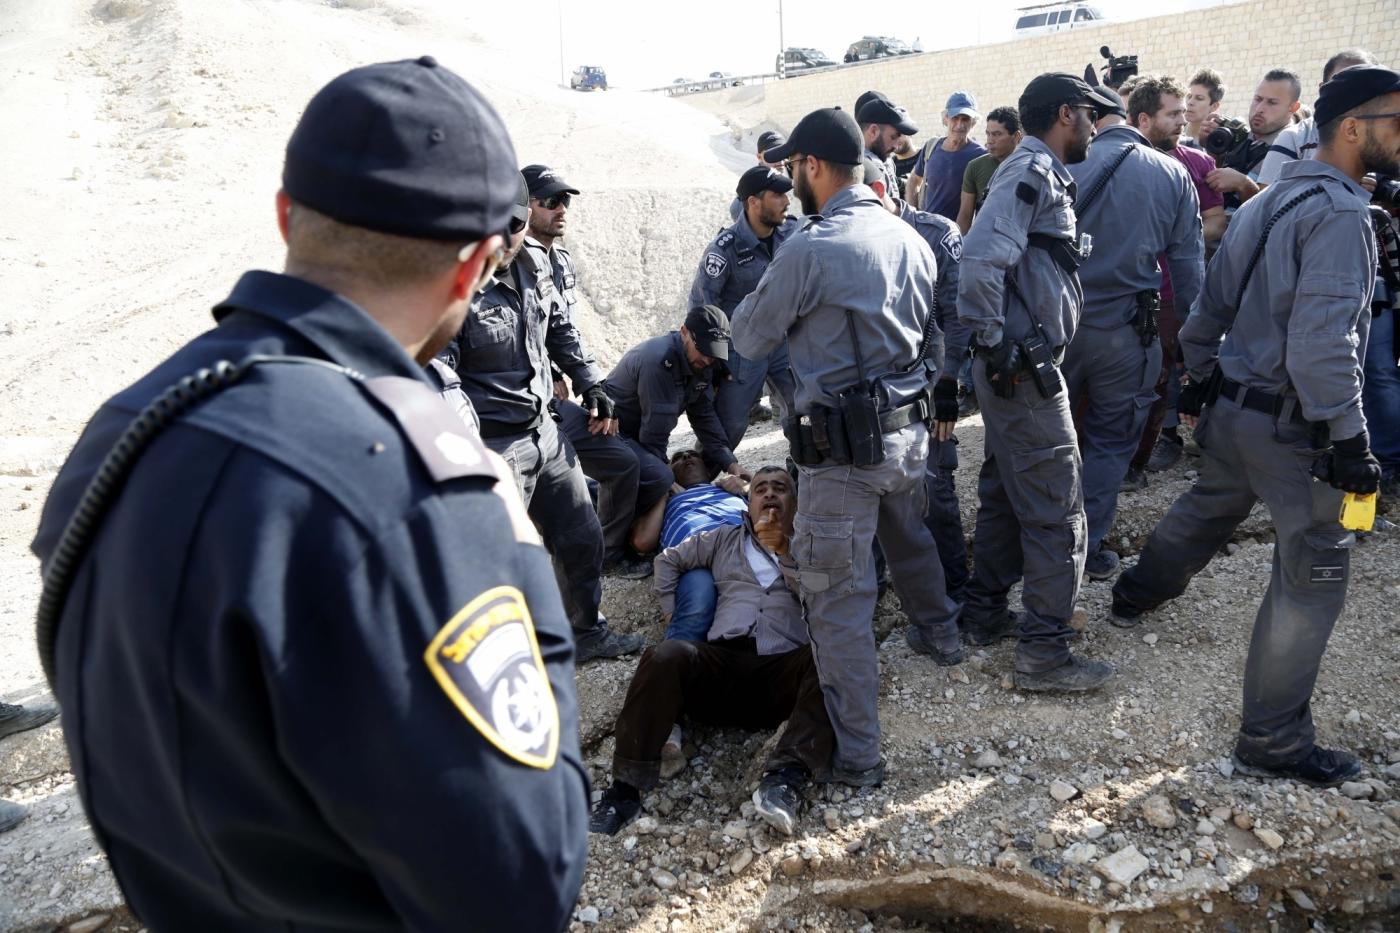 JERICHO, Oct. 15, 2018 (Xinhua) -- Israeli forces detain activists at the Palestinian Bedouin community of Khan al-Ahmar that Israel plans to demolish, located between the West Bank city of Jericho and Jerusalem, on Oct. 15, 2018. Khan al-Ahmar is a Bedouin community built without permission, according to the Israeli authorities. (Xinhua/Mamoun Wazwaz/IANS) by .